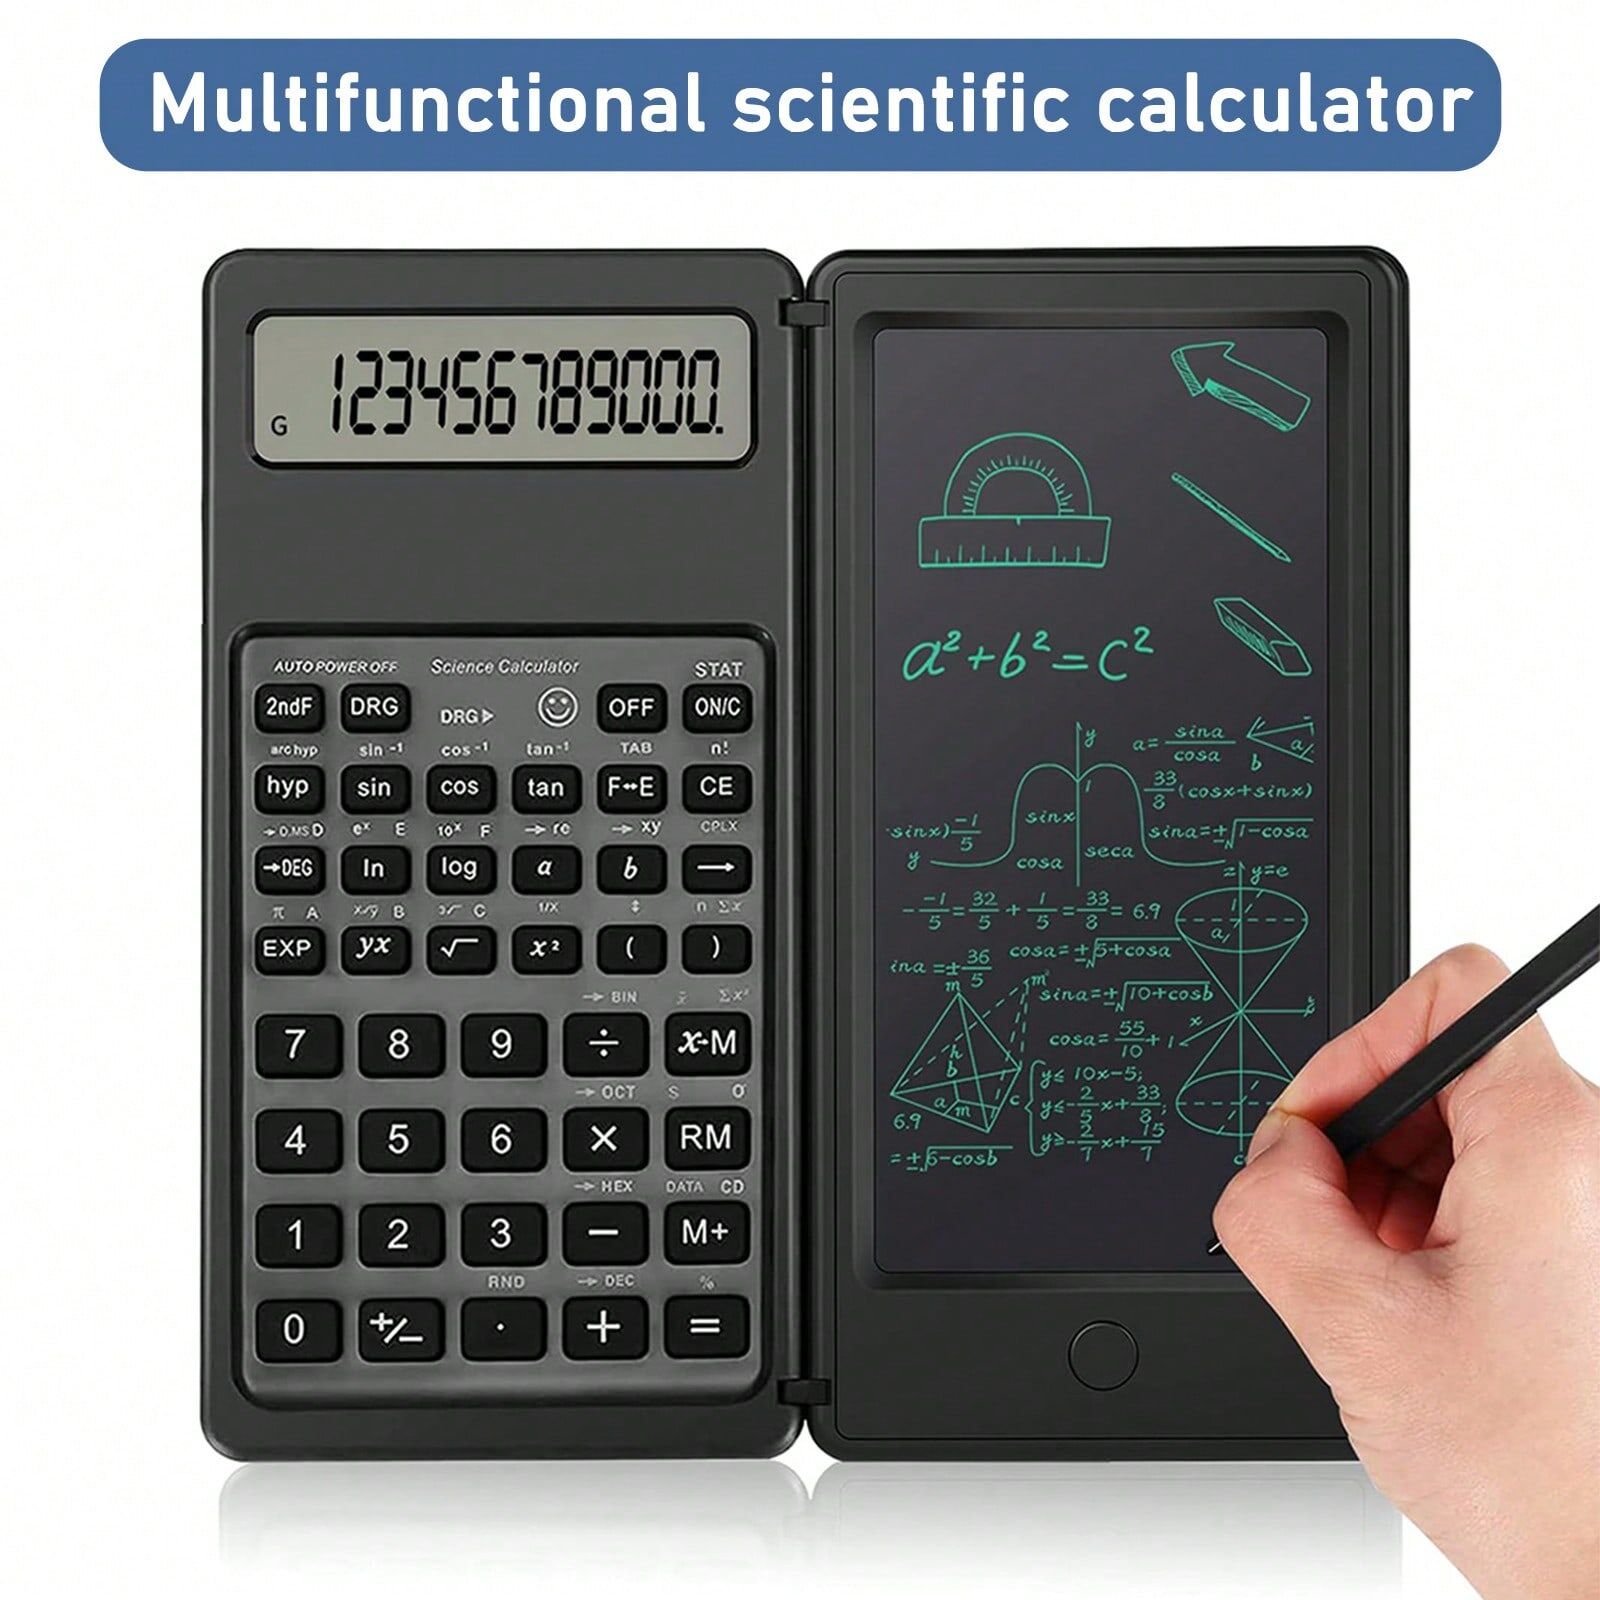 SHEIN Foldable Scientific Calculators 10 Digit LCD Display Desktop Calculators Comes with a 6 inch Writing Tablet for High School, College and Office Business Support Stylus Pen Erase Button Lock Black